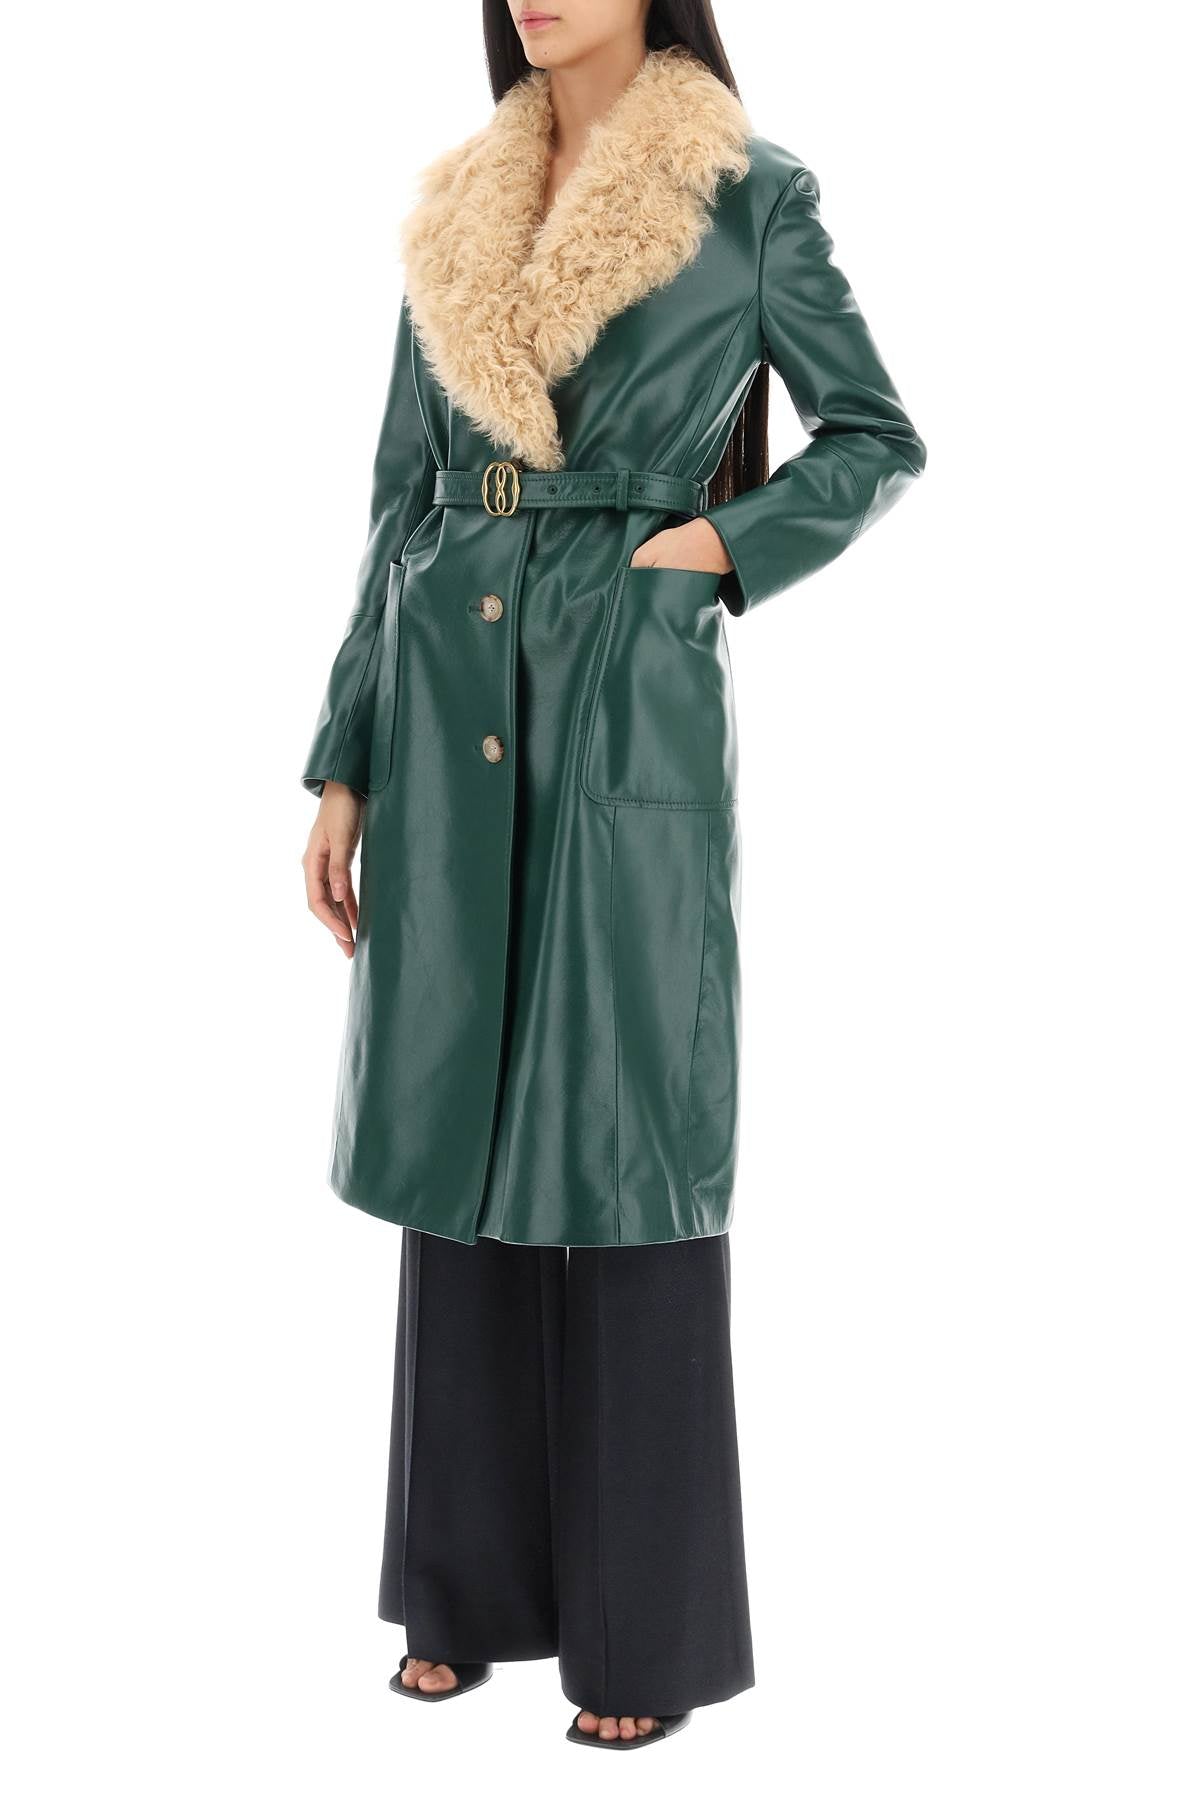 Bally leather and shearling coat-3